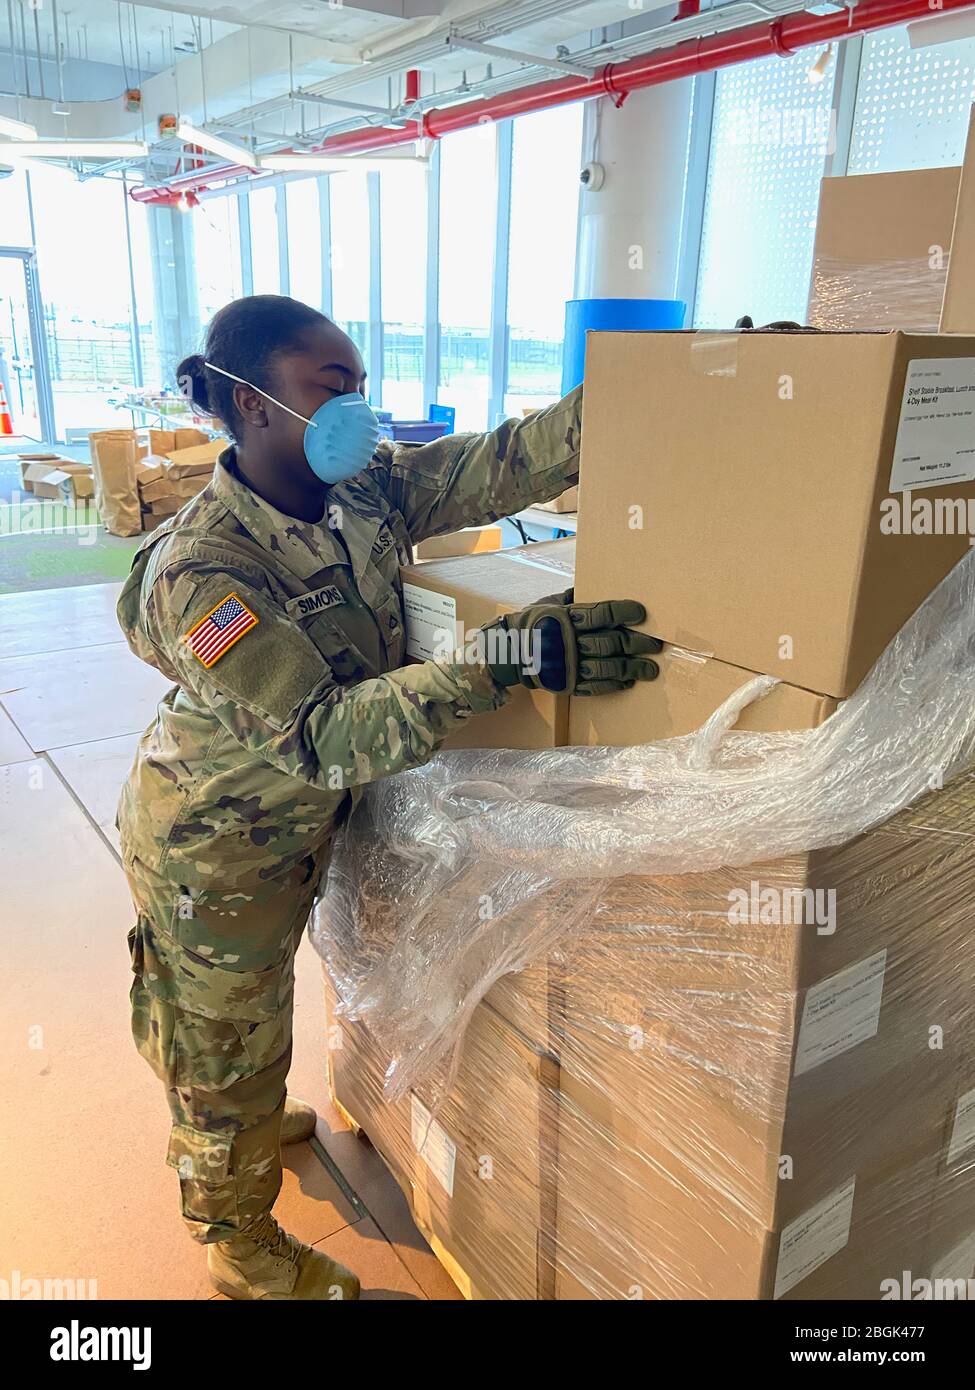 New York Army National Guard Pfc. Daijah Simins, assigned to the 1st Battalion, 258th Field Artillery, part of the 27th Infantry Brigade Combat Team, unloads meals from a pallet at the Staten Island food distribution site April 10, 2020. The meals are placed into a waiting taxi for delivery to quarantined residents unable to leave their homes in New York City. National Guard Soldiers have distributed 714,731 meals across the five boroughs of New York City as part of the National Guard’ support to communities impacted by the COVID-19 pandemic. U.S. National Guard photo by 1st Lt. Nate Sanders. Stock Photo